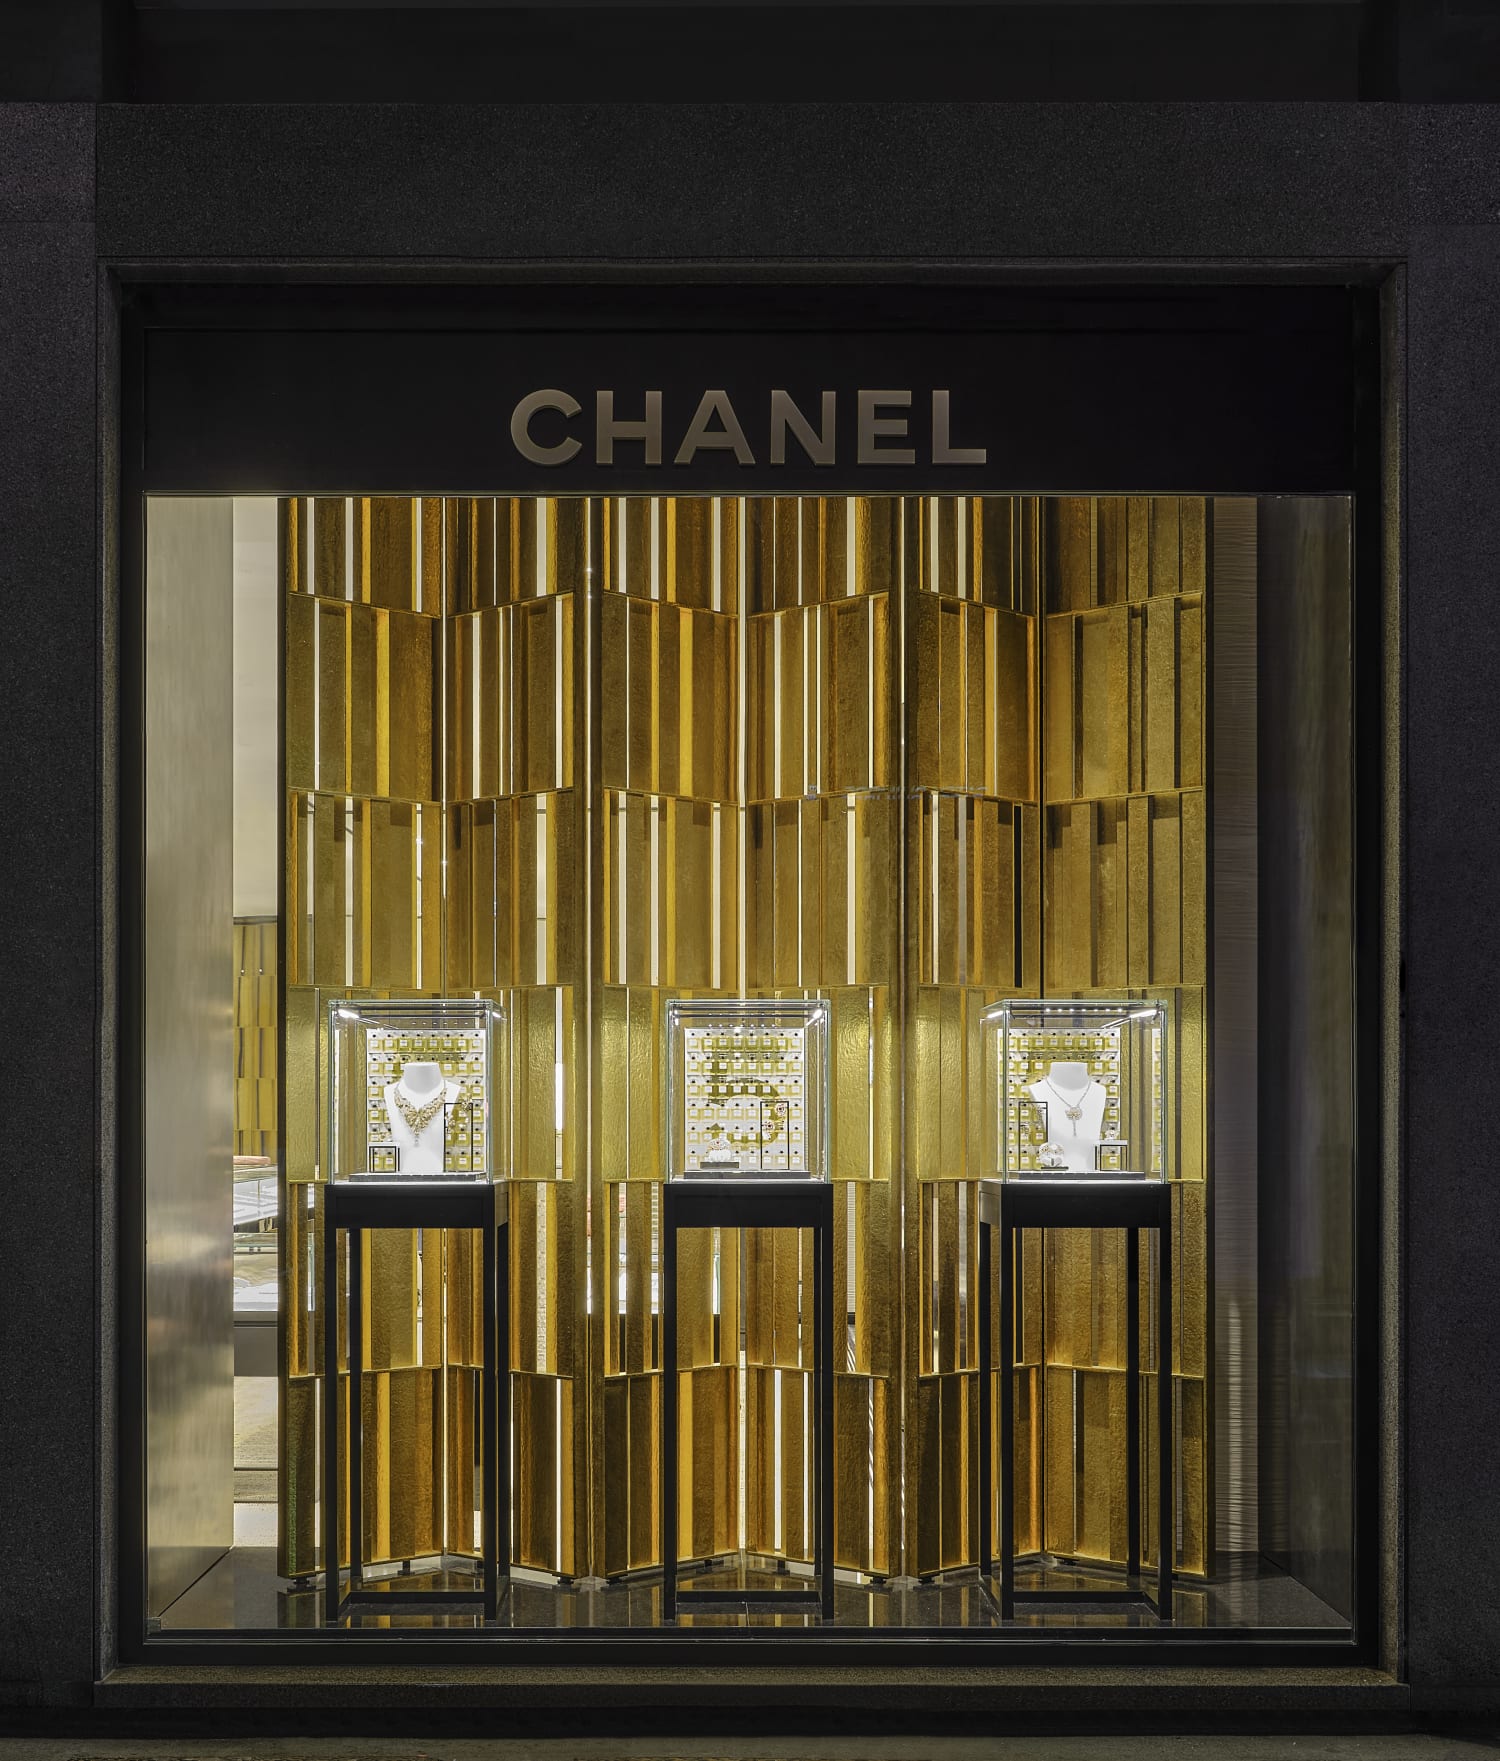 Chanel new boutique opening event in Milan